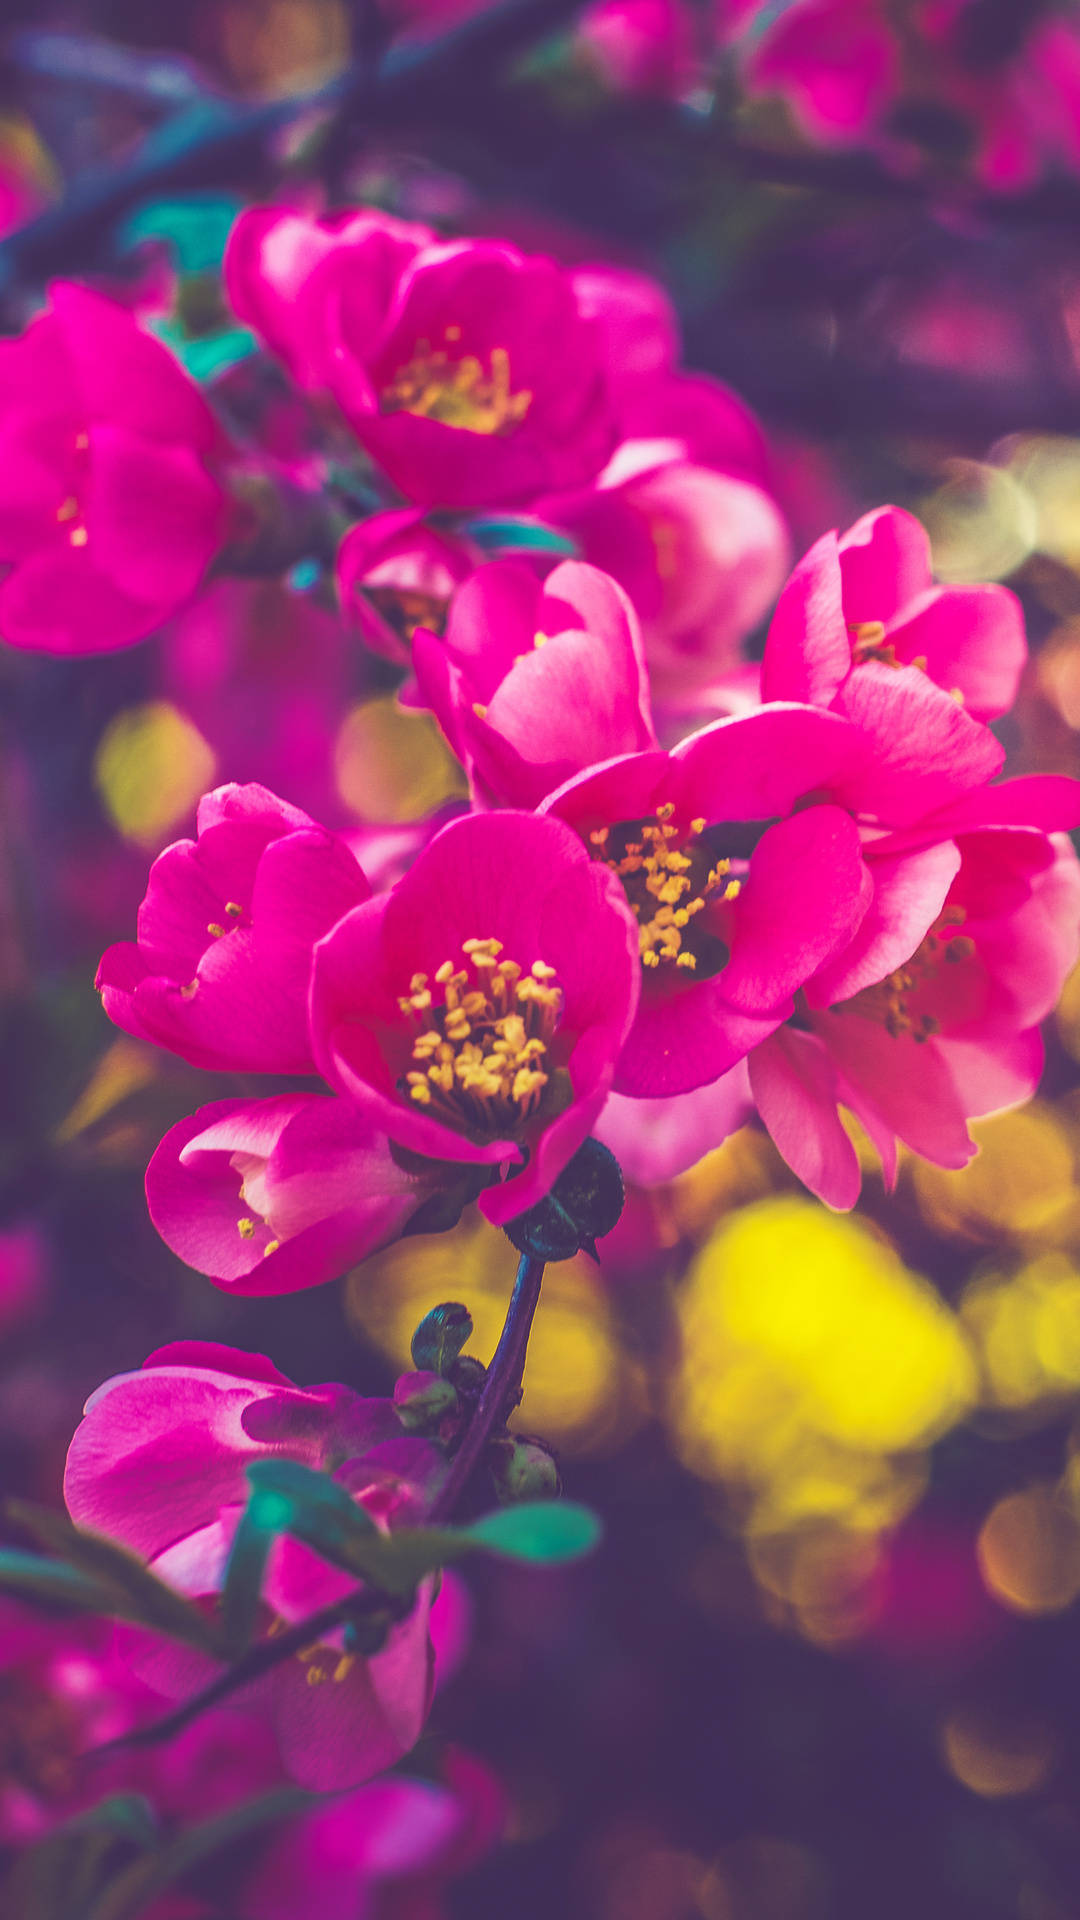 Pink Flowers On A Branch With Blurred Background Wallpaper